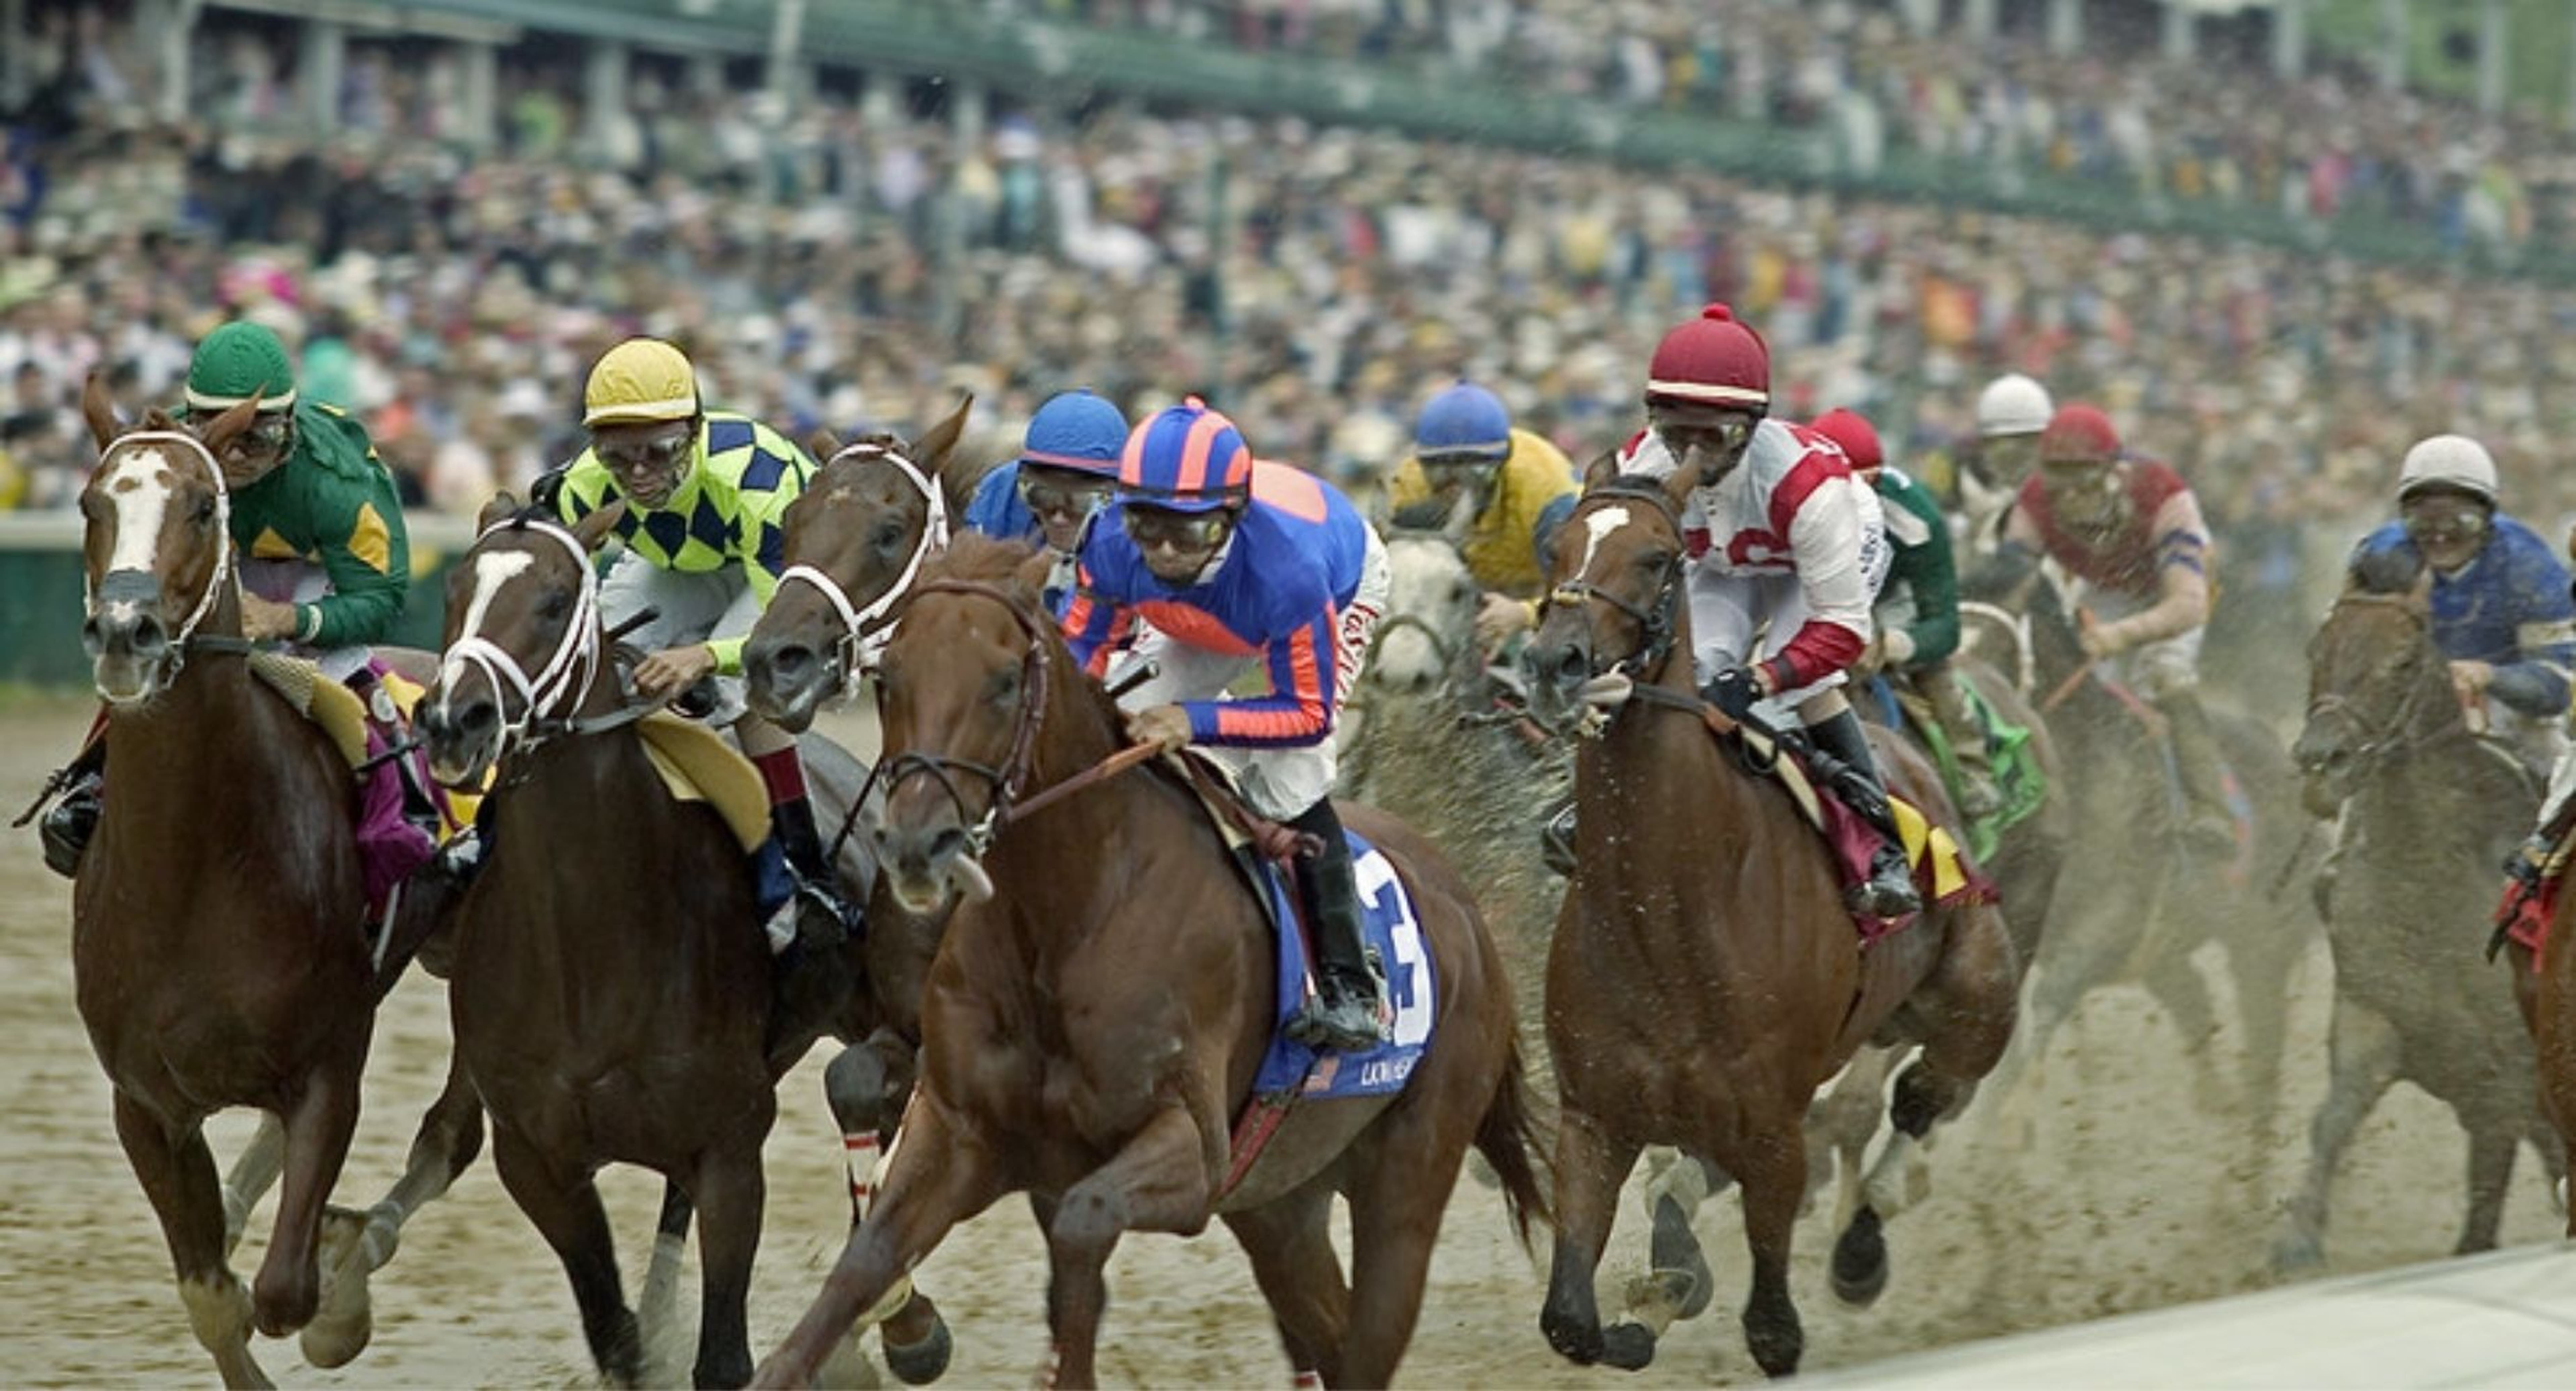 Can A Huge Kentucky Derby Upset Bring Viewers, Fans Back To Horse Racing After Year Of Scandal?